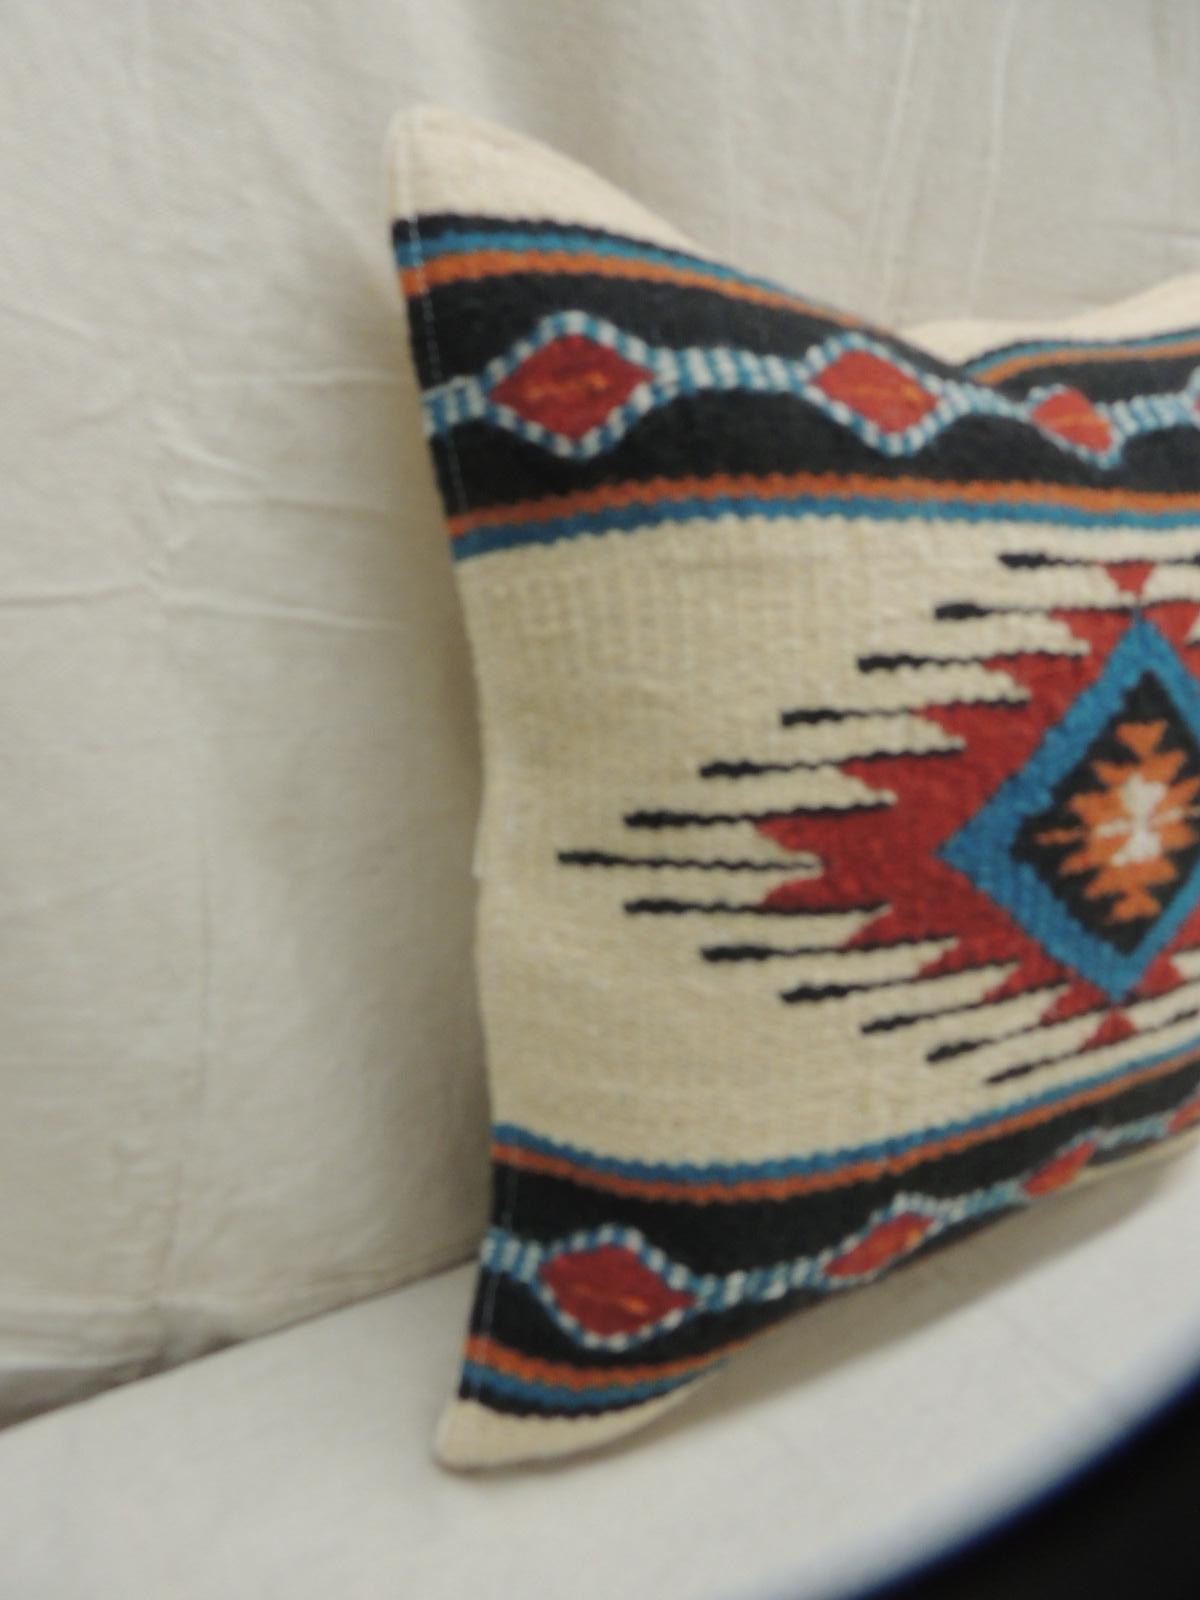 Vintage red and blue Navajo style woven decorative square pillow with cotton backing.
Decorative pillow handcrafted and designed in the USA.
Closure by stitch (no zipper closure) with custom made pillow insert.
Size: 18